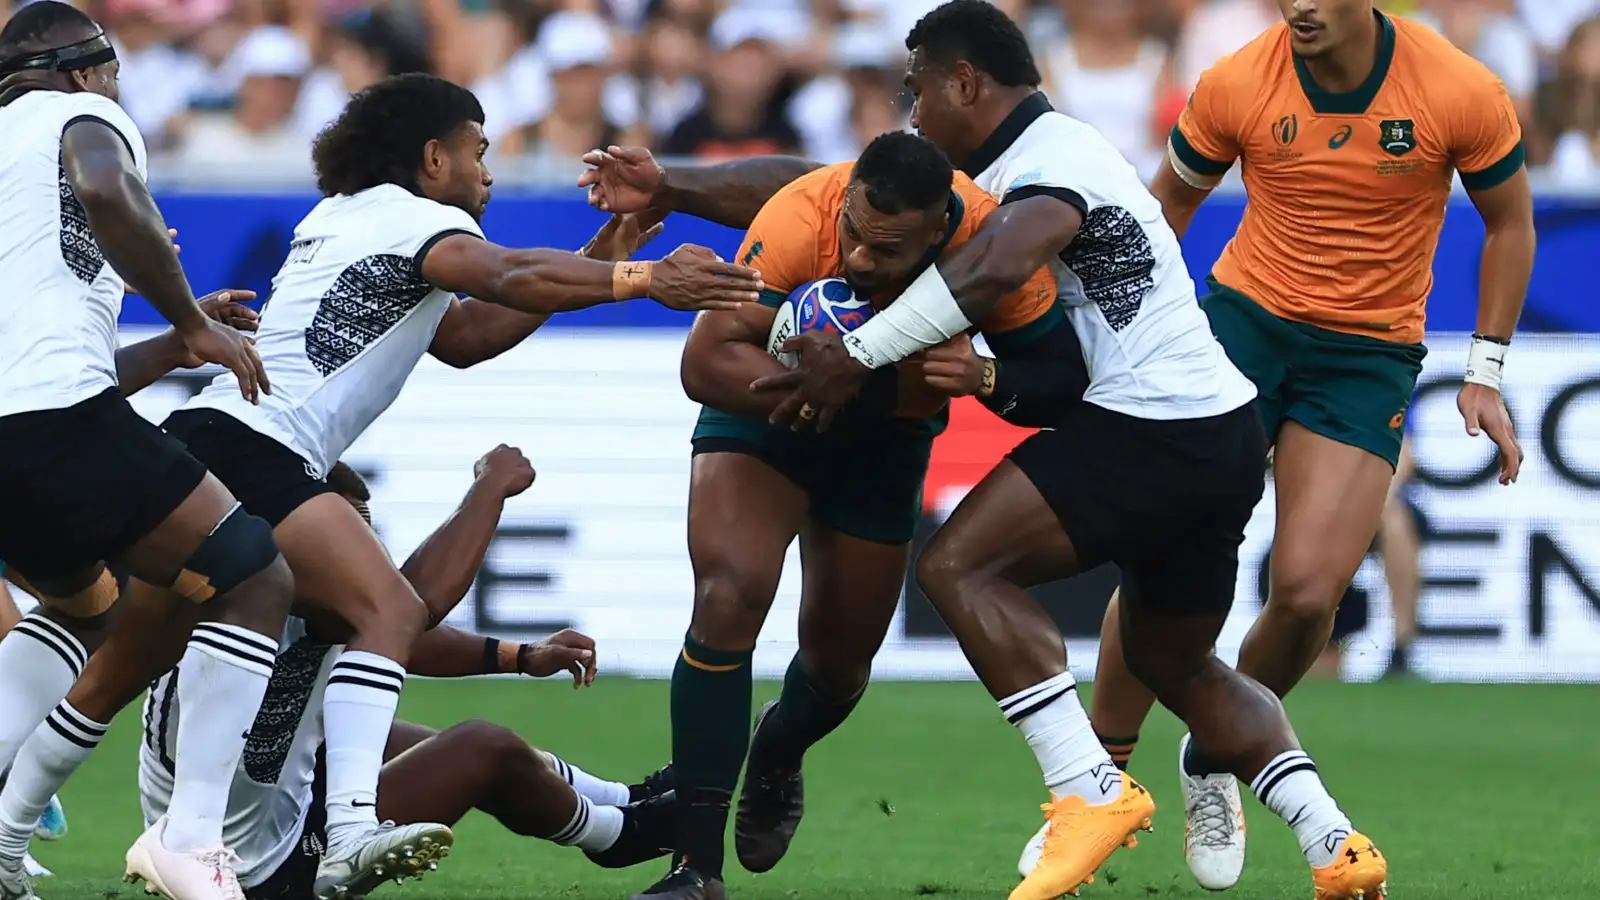 Wallaby Samu Kerevi on the charge against Fiji.